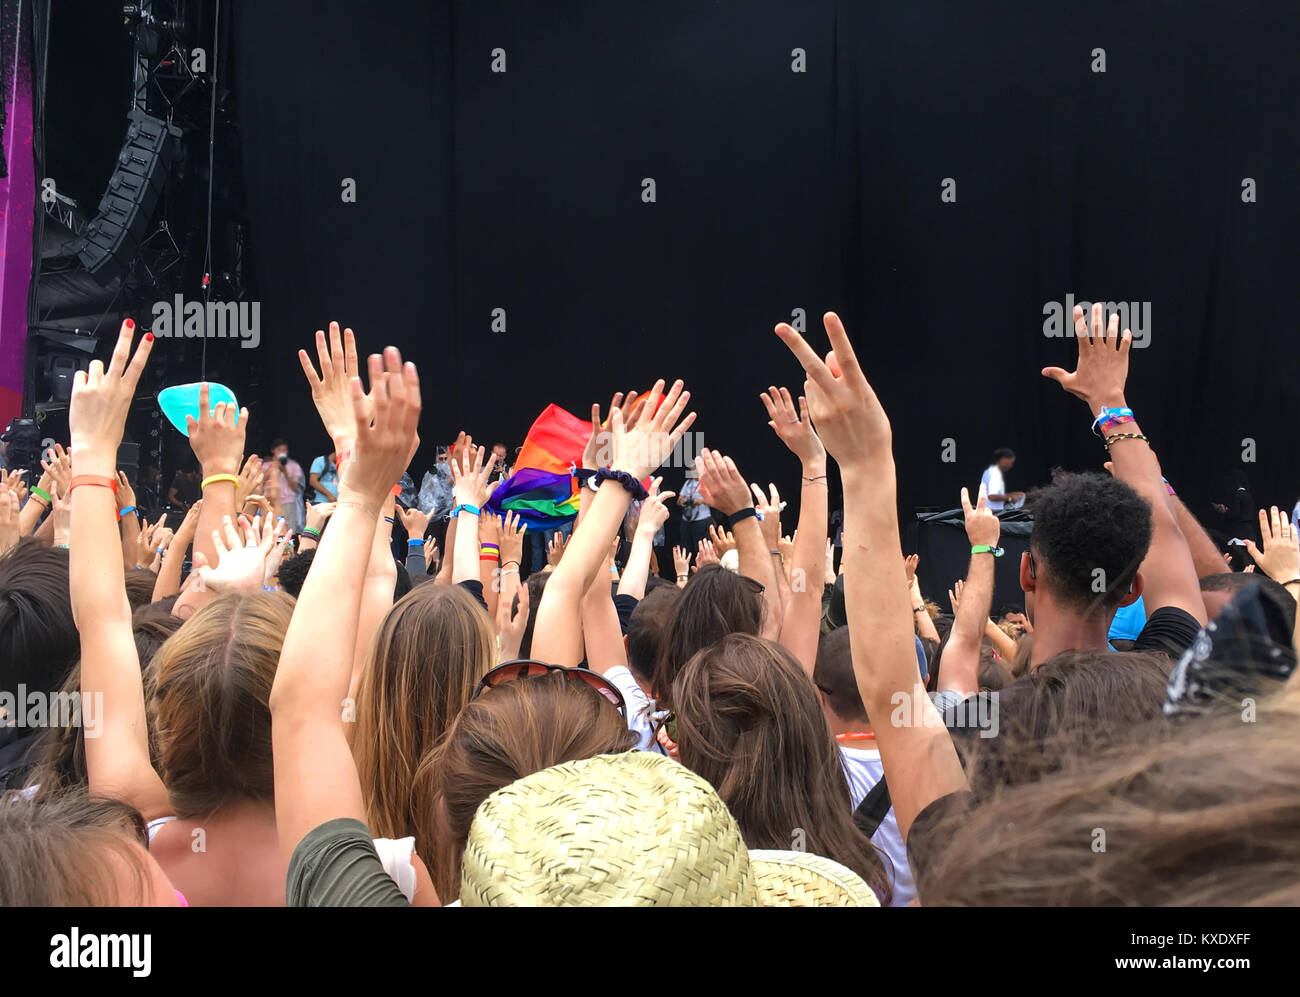 Audience with hands raised at a music festival, empty stage with copy space in the background Stock Photo